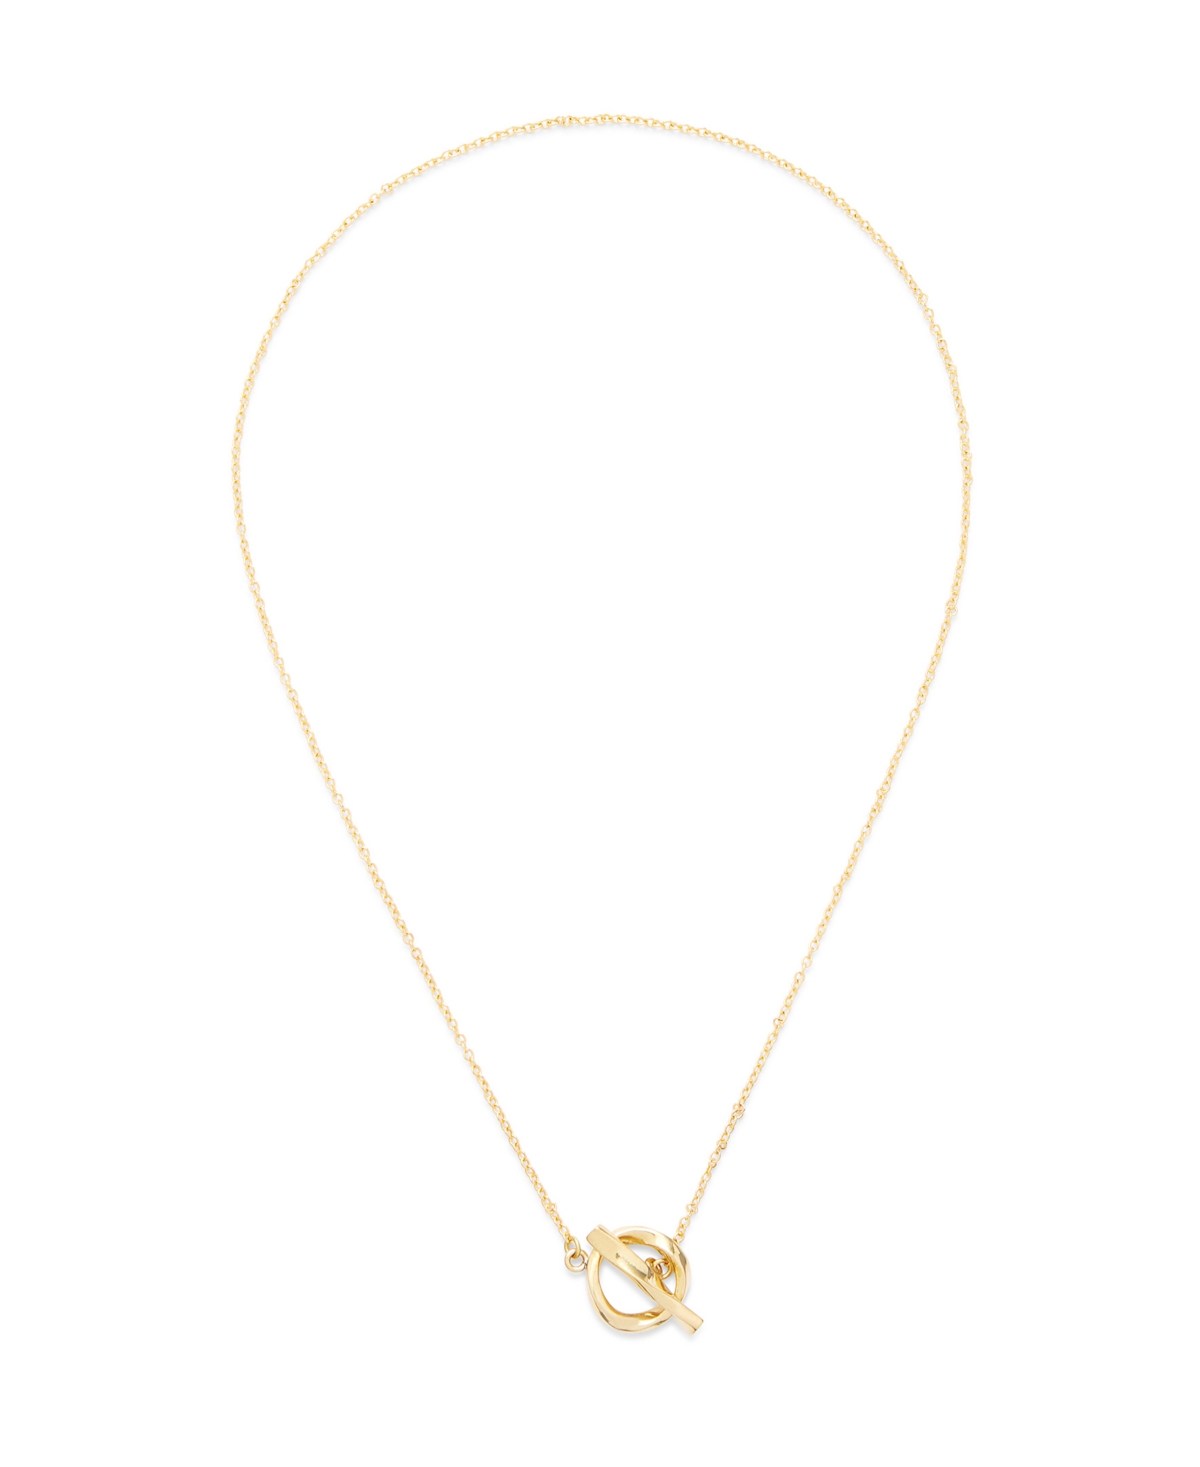 Soko 24k Gold-plated Twist Lariat Necklace